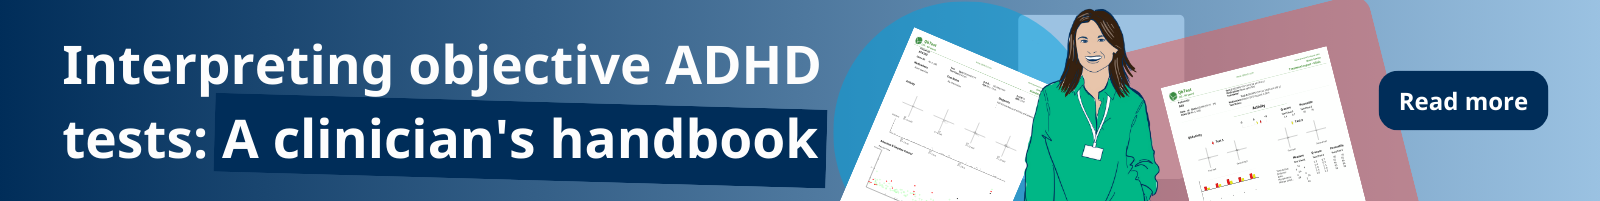 Interpreting objective ADHD tests: A clinician’s reference guide